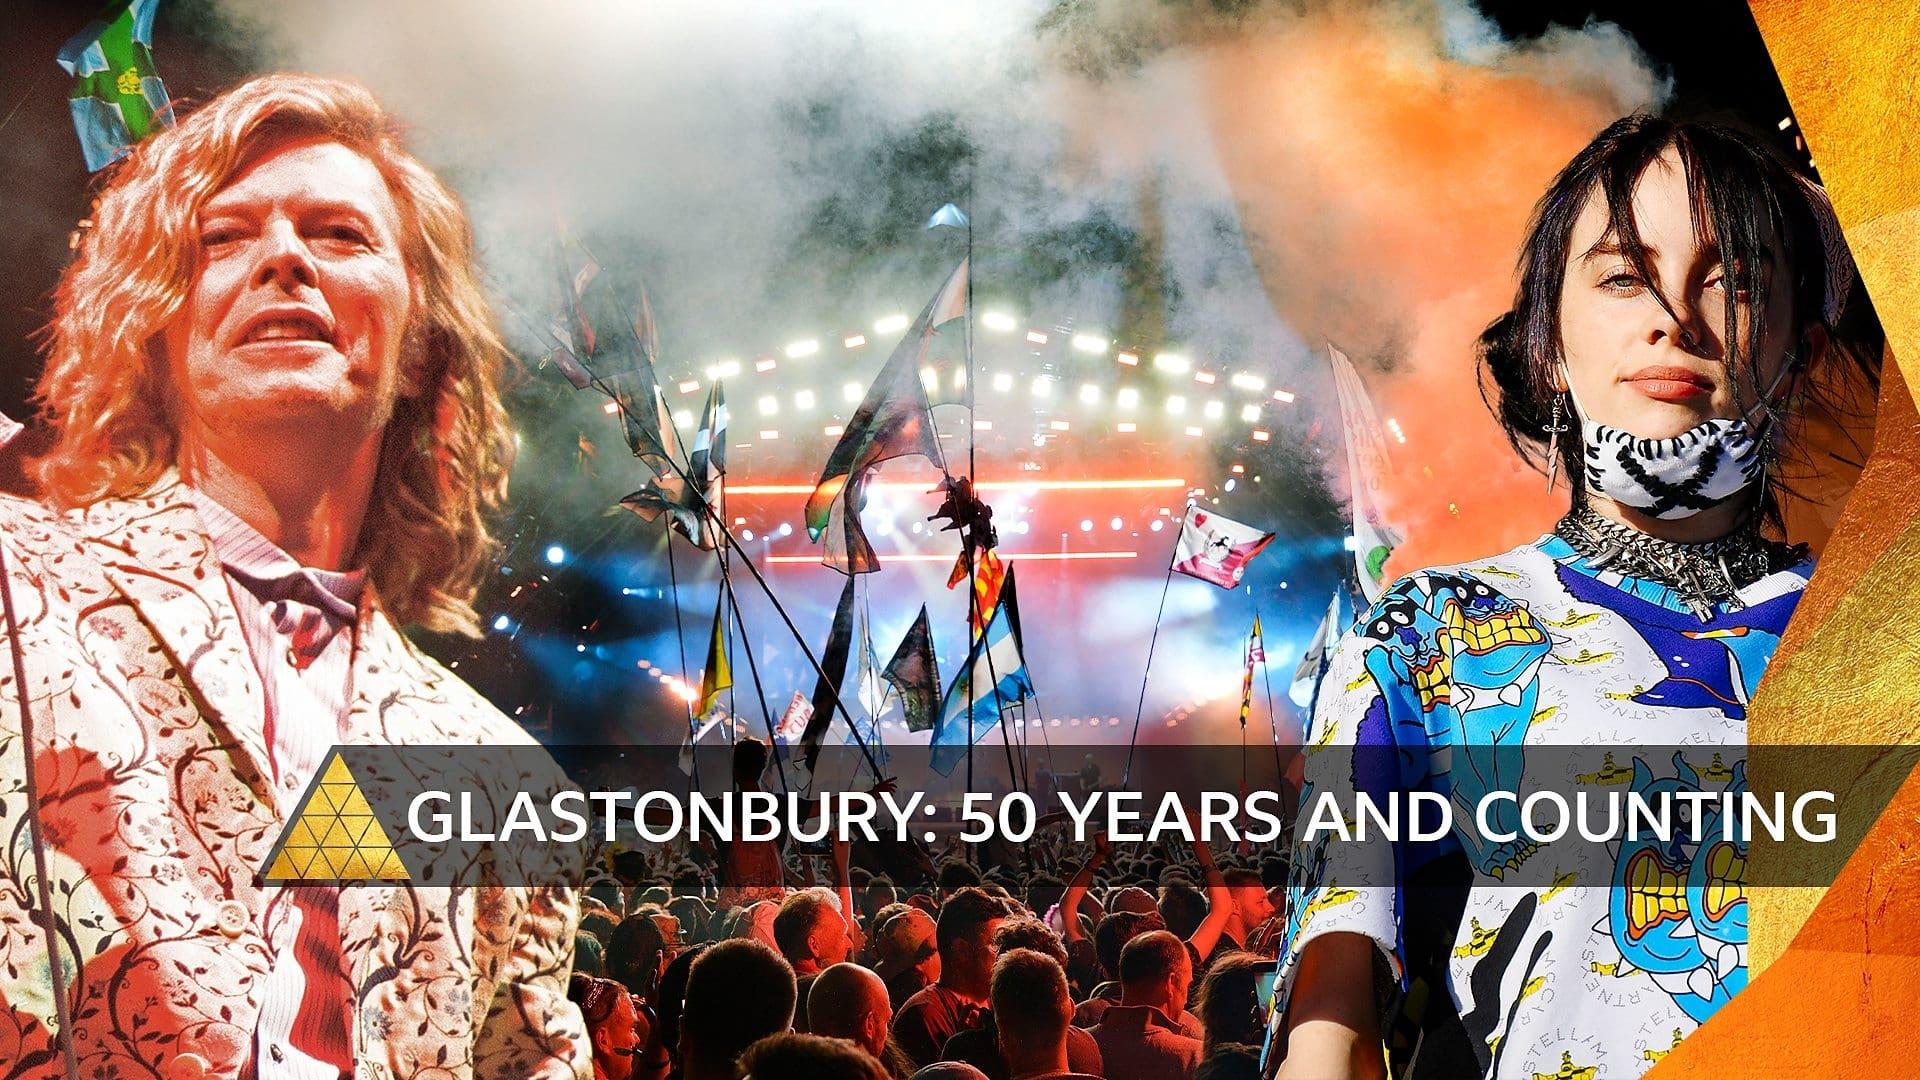 Glastonbury: 50 Years and Counting backdrop